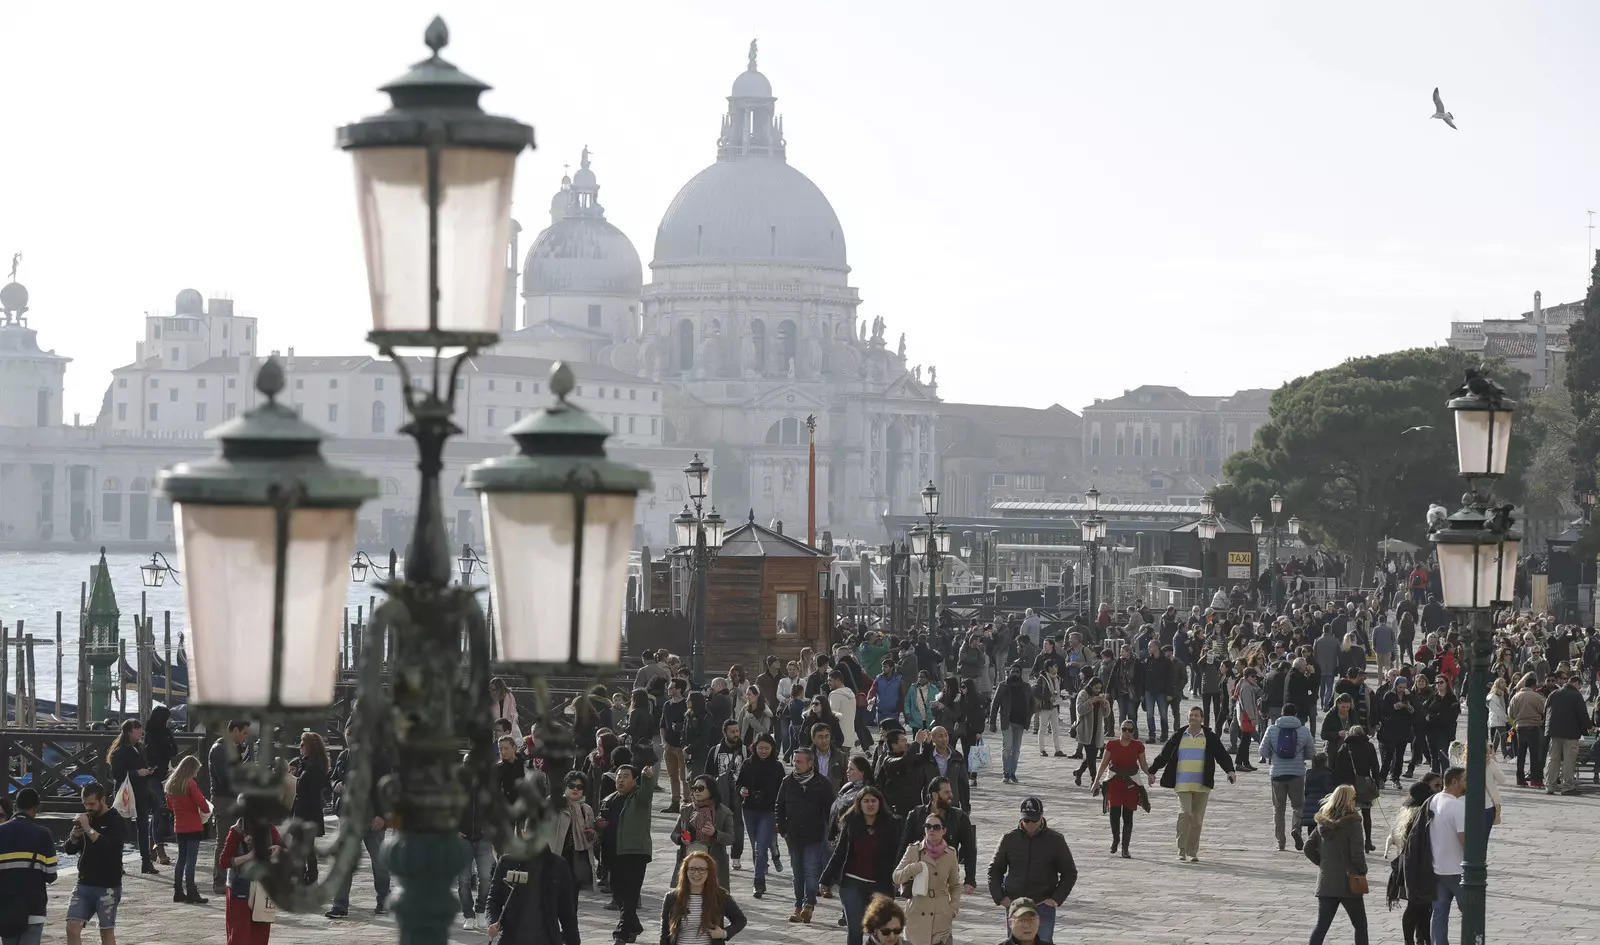   Tourists stroll in downtown Venice, Italy, Nov.  12, 2016. Starting in January, Venice will oblige day-trippers to make reservations and pay a fee to visit the historic lagoon city.  On many days, the heart of Venice is overwhelmed by visitors, who often far outnumber residents.  Venice officials on Friday unveiled new rules for day-trippers, which go into effect on Jan.  16, 2023.